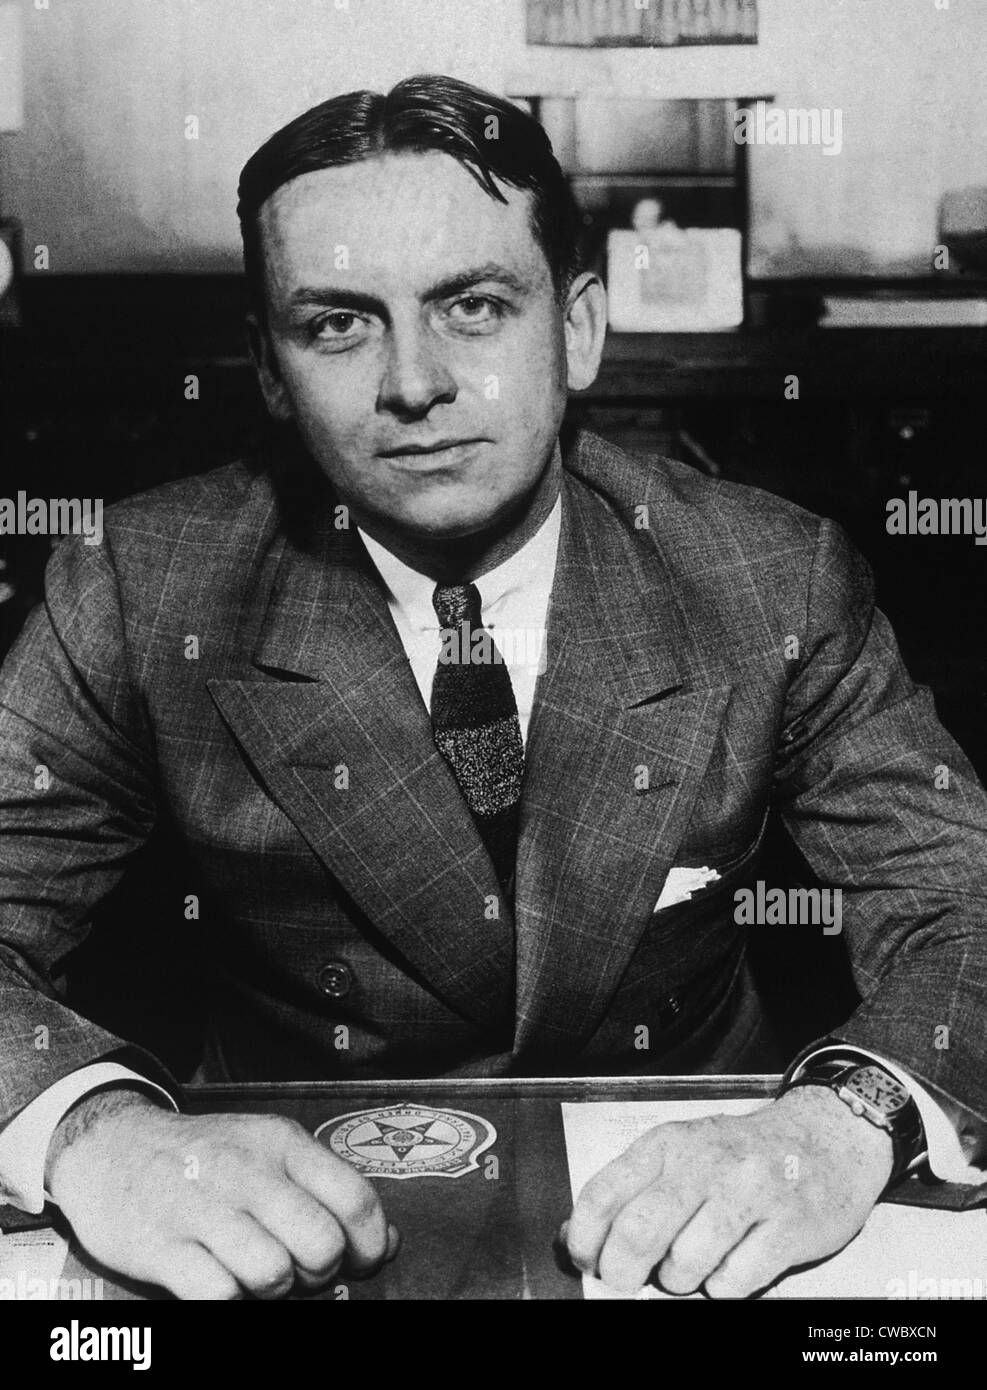 Eliot Ness (1903-1957), as Treasury Department Prohibition agent assigned to bring down Al Capone, created a team of Stock Photo